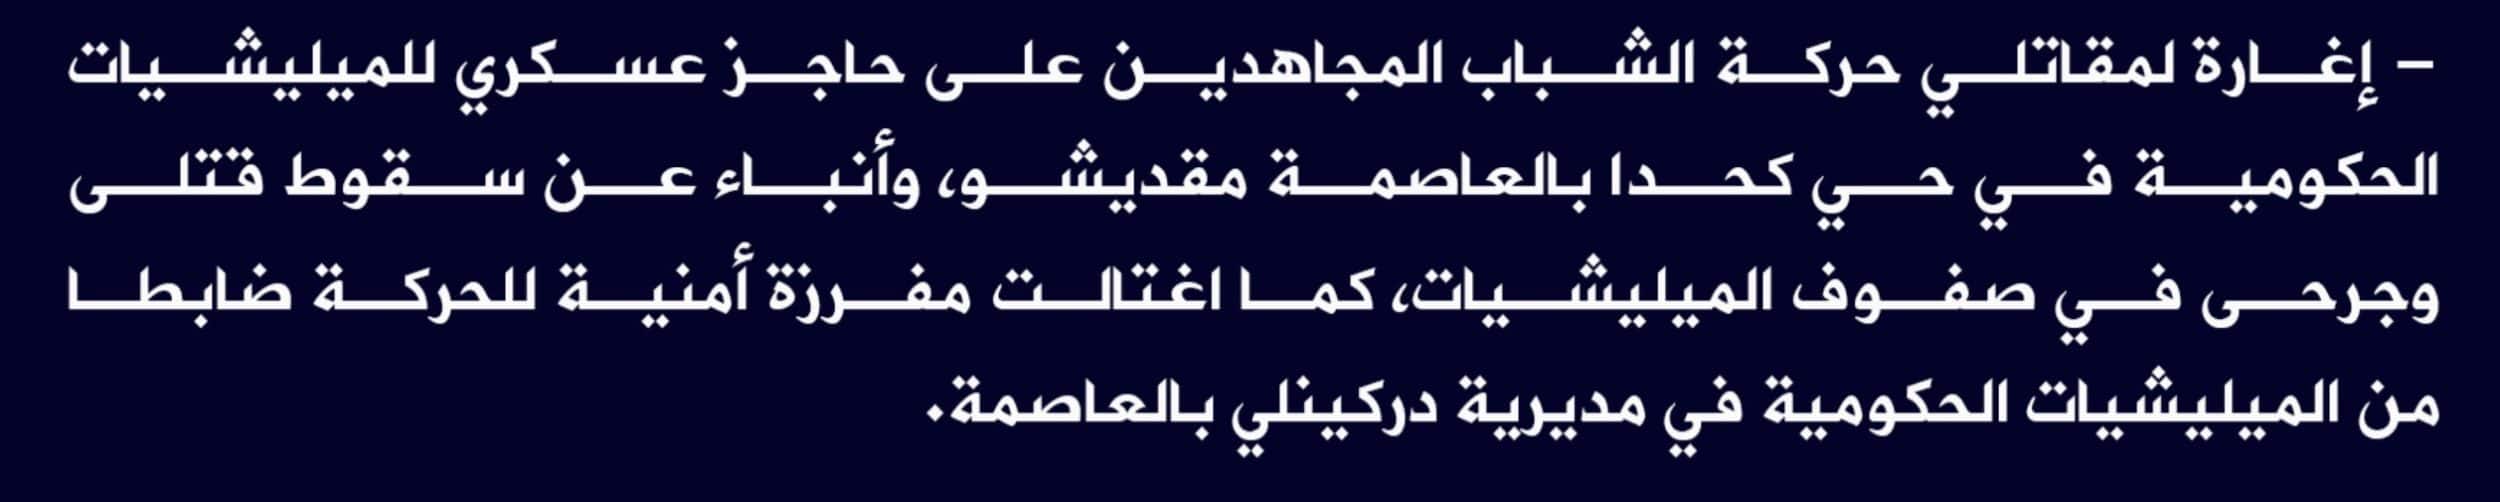 (Claim) al-Shabaab: Mujahideen Attacked a Military Checkpoint in Kahda District and Assassinated an Officer in Darkinli, Mogadishu, Somalia - 26 April 2022